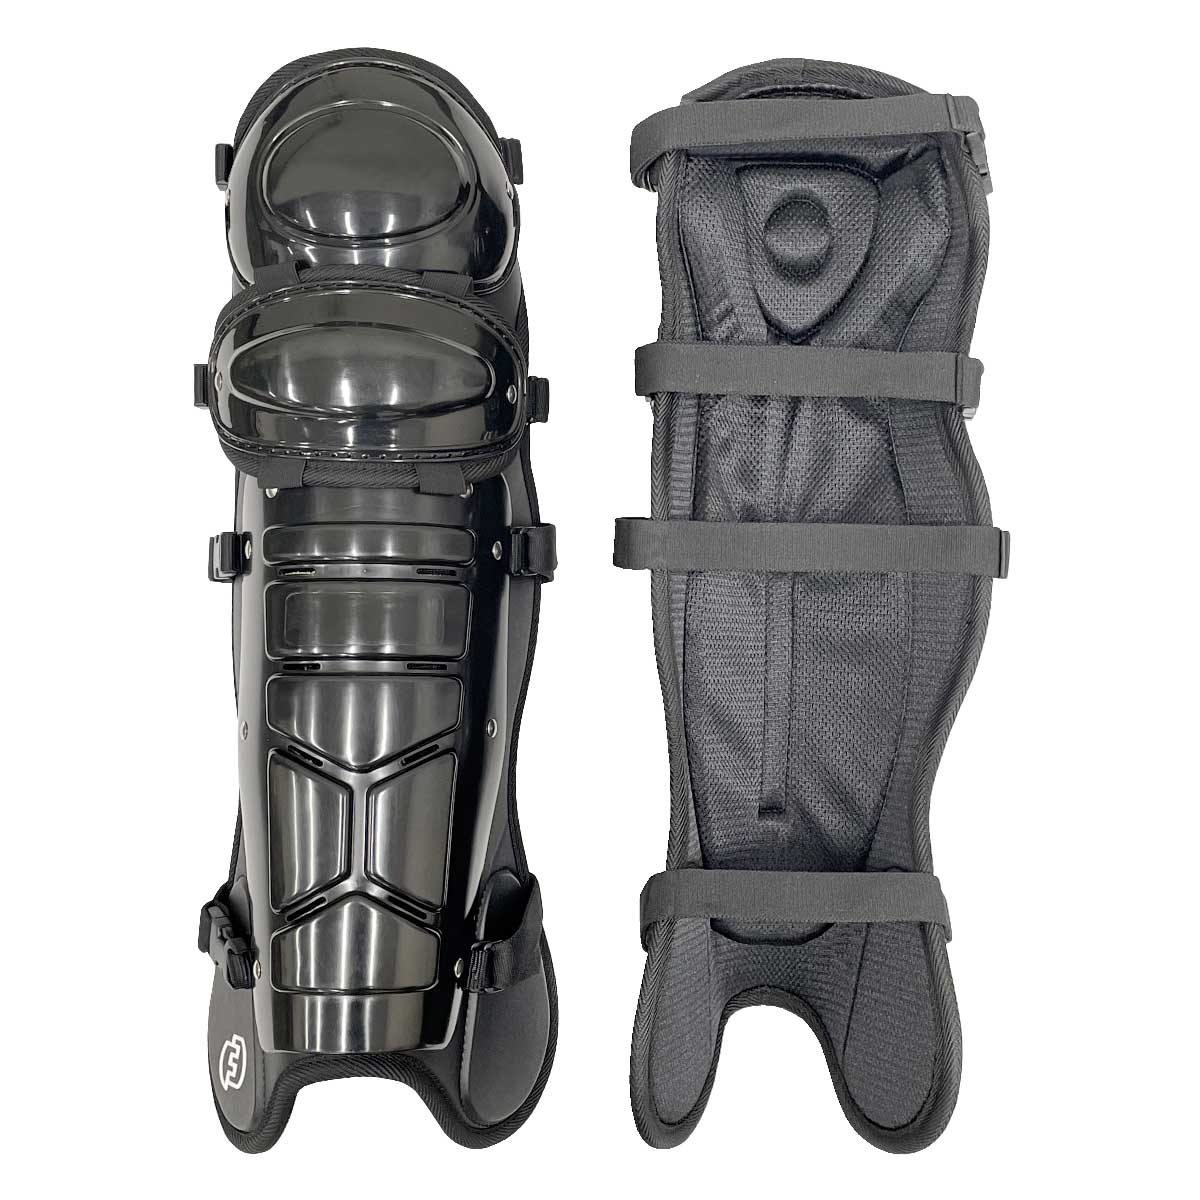 Force3 Ultimate Umpire 16.5 Shin Guards